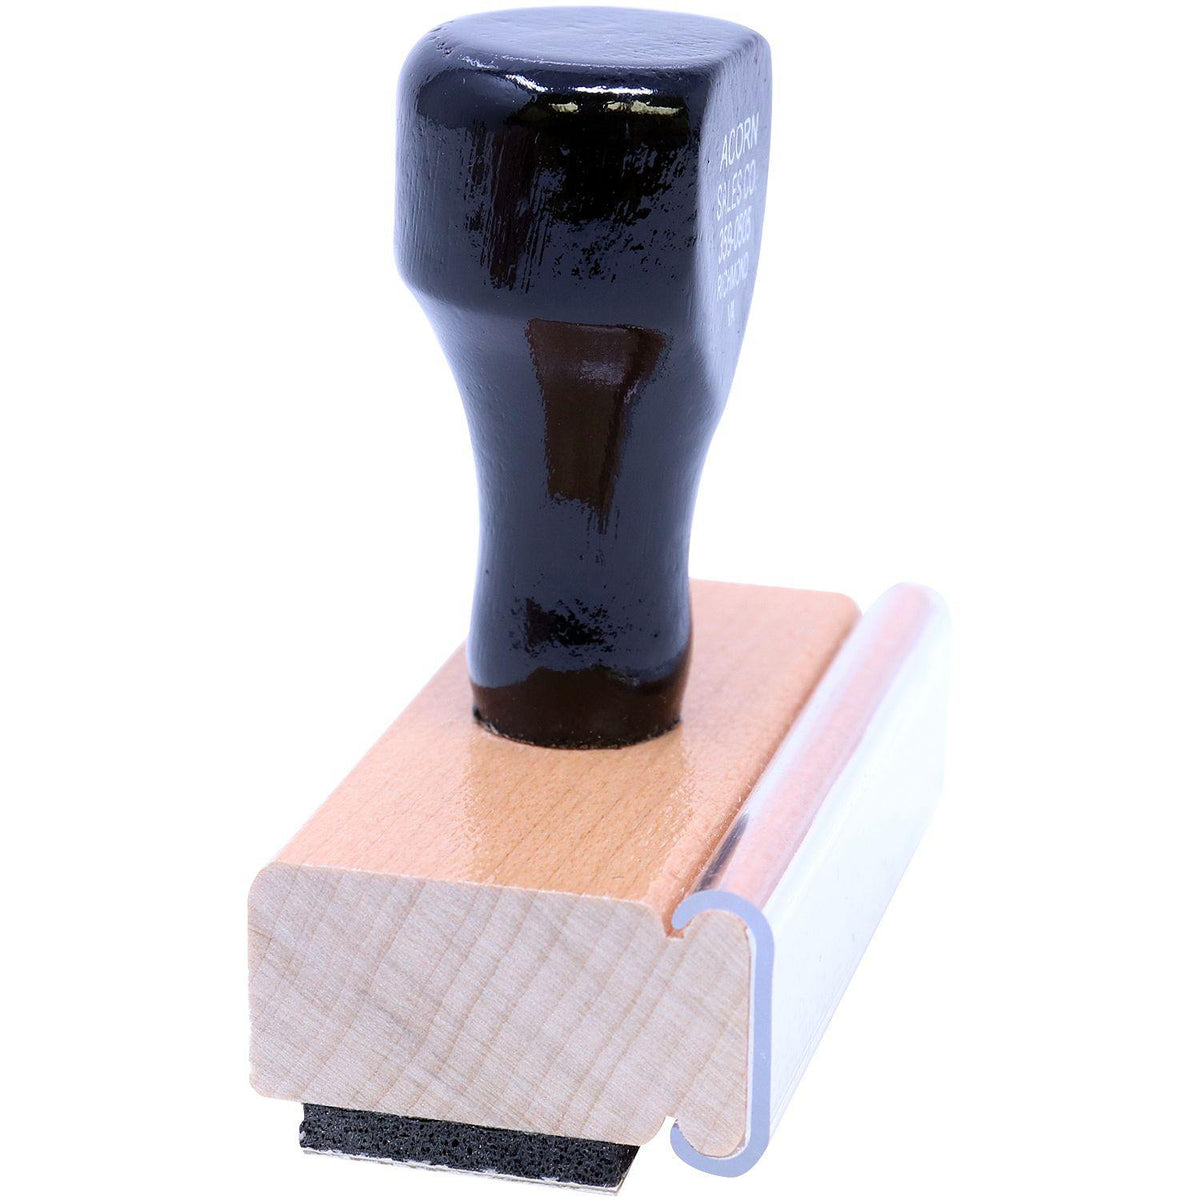 Side View of Anesthesiology Rubber Stamp at an Angle